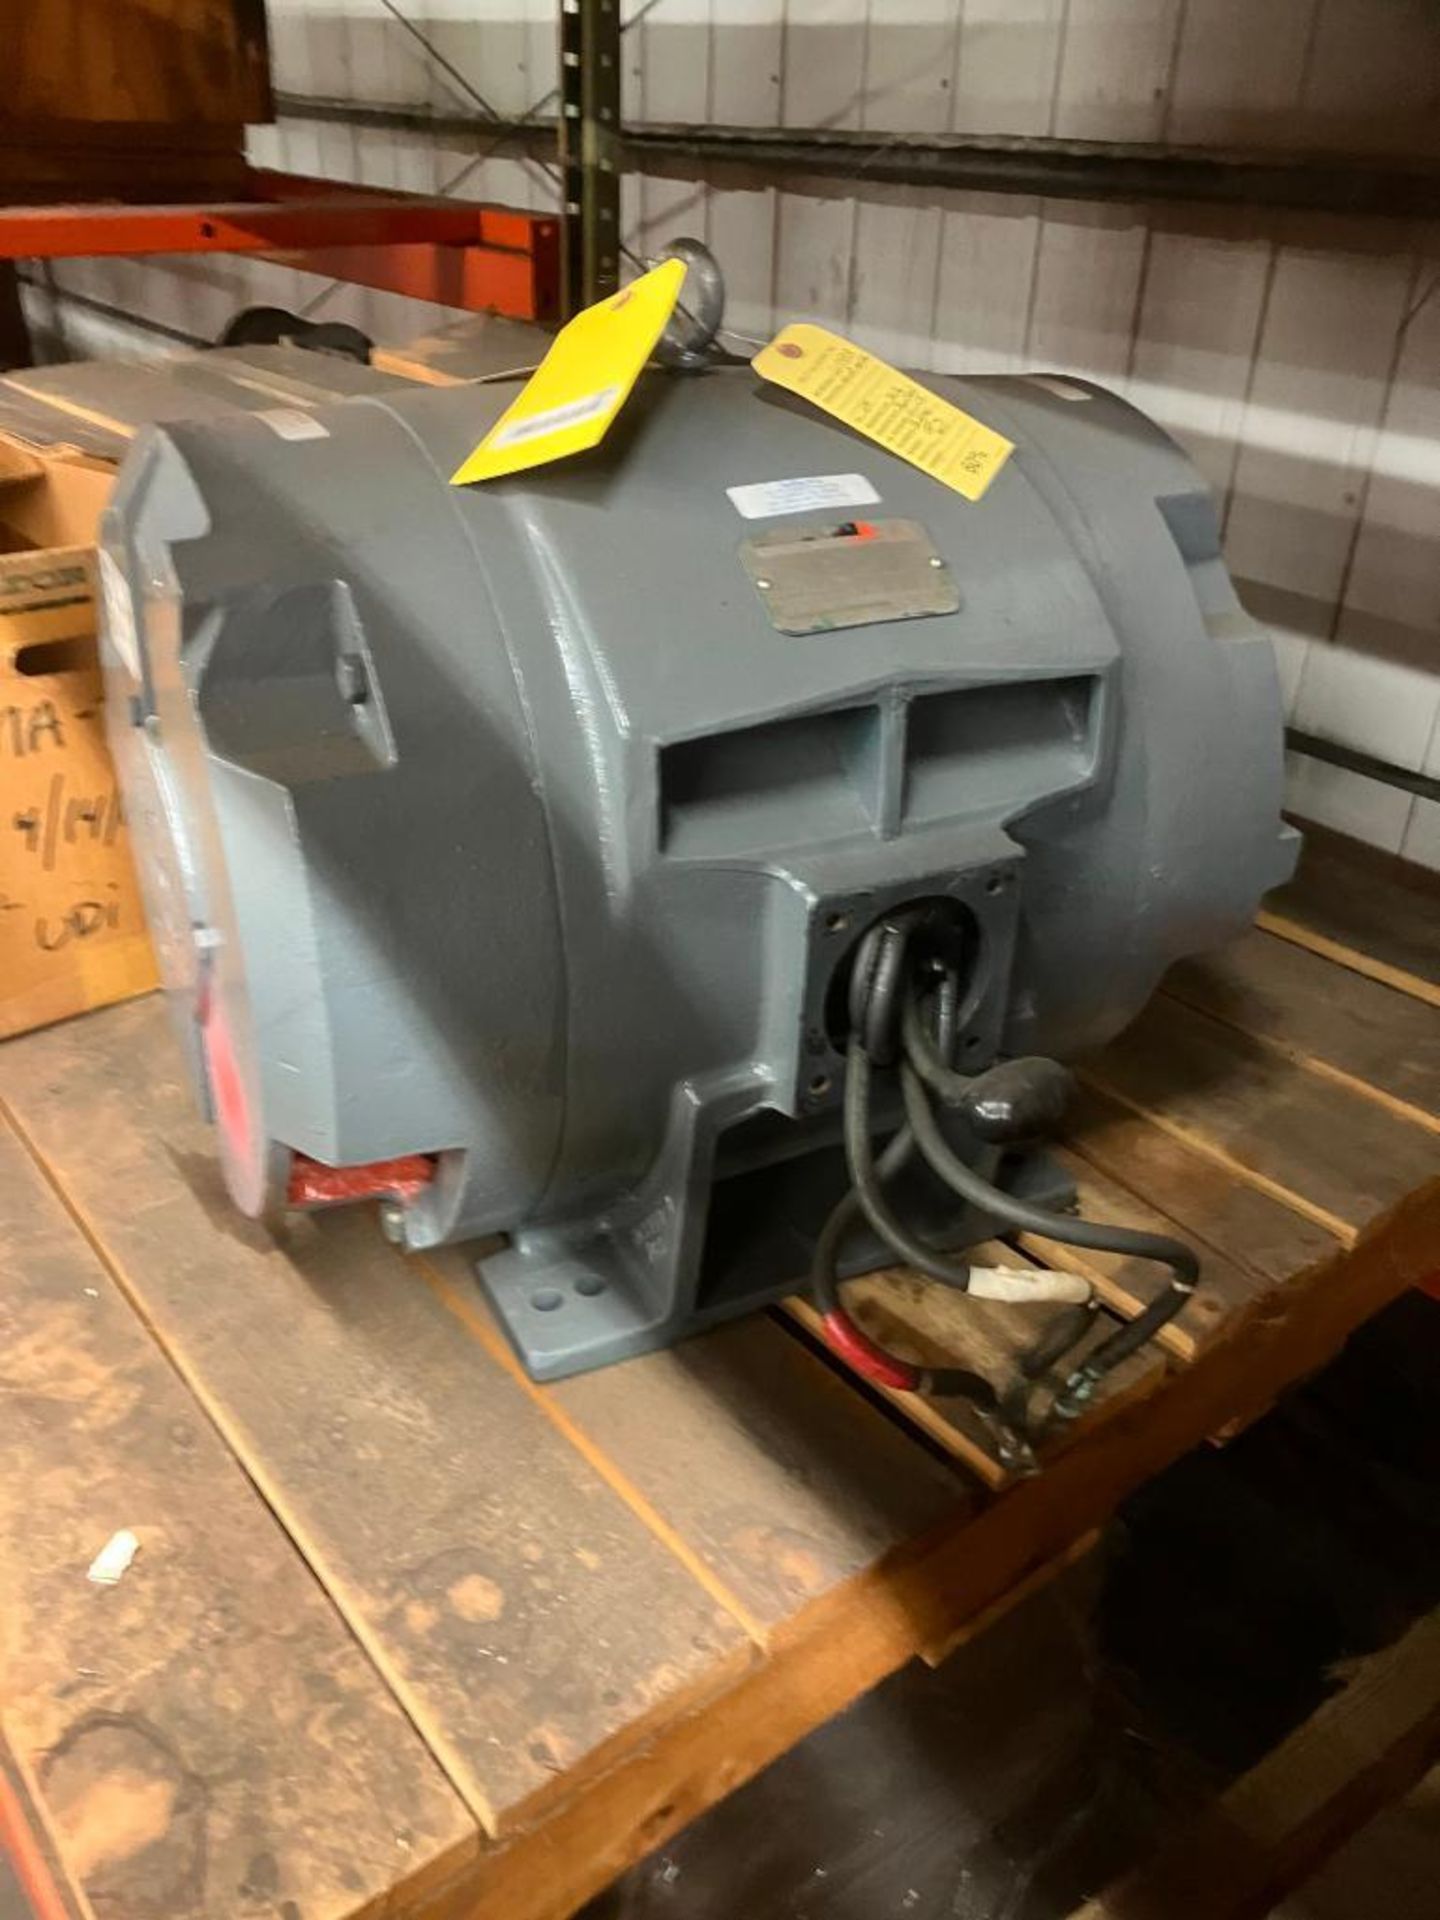 RELIANCE 100 HP ELECTRIC MOTOR, 355TS FRAME, 3,550 RPM, 230/460 V., 3 PHASE